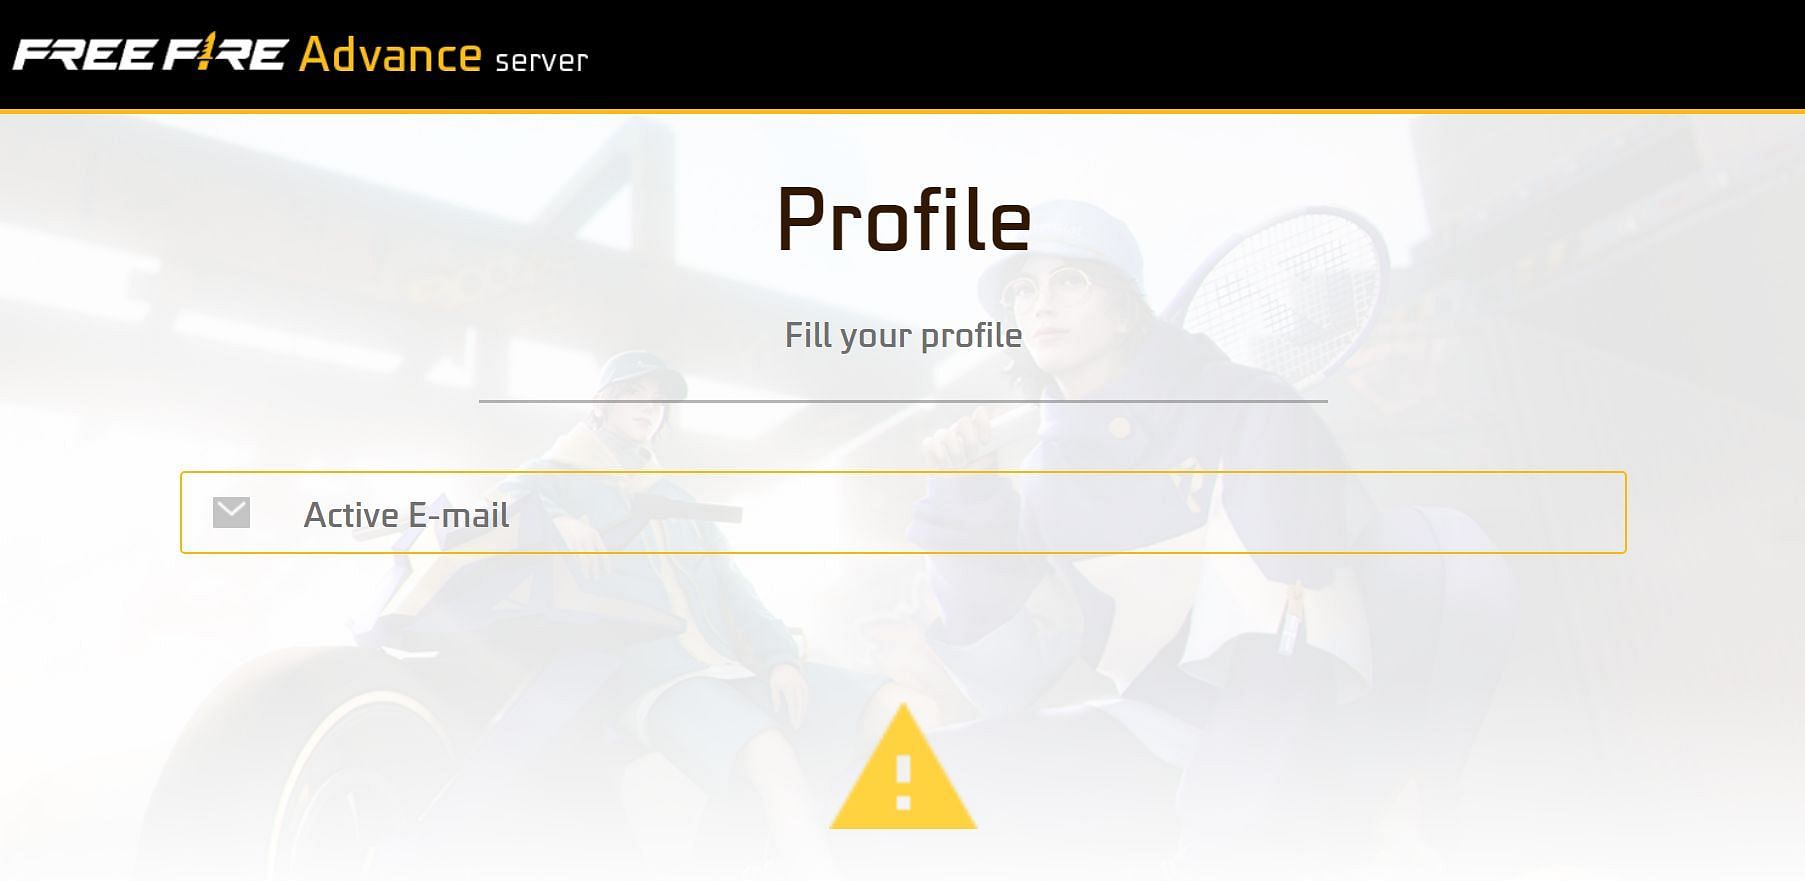 Please fill in your active email ID in the given box (Image via Garena)